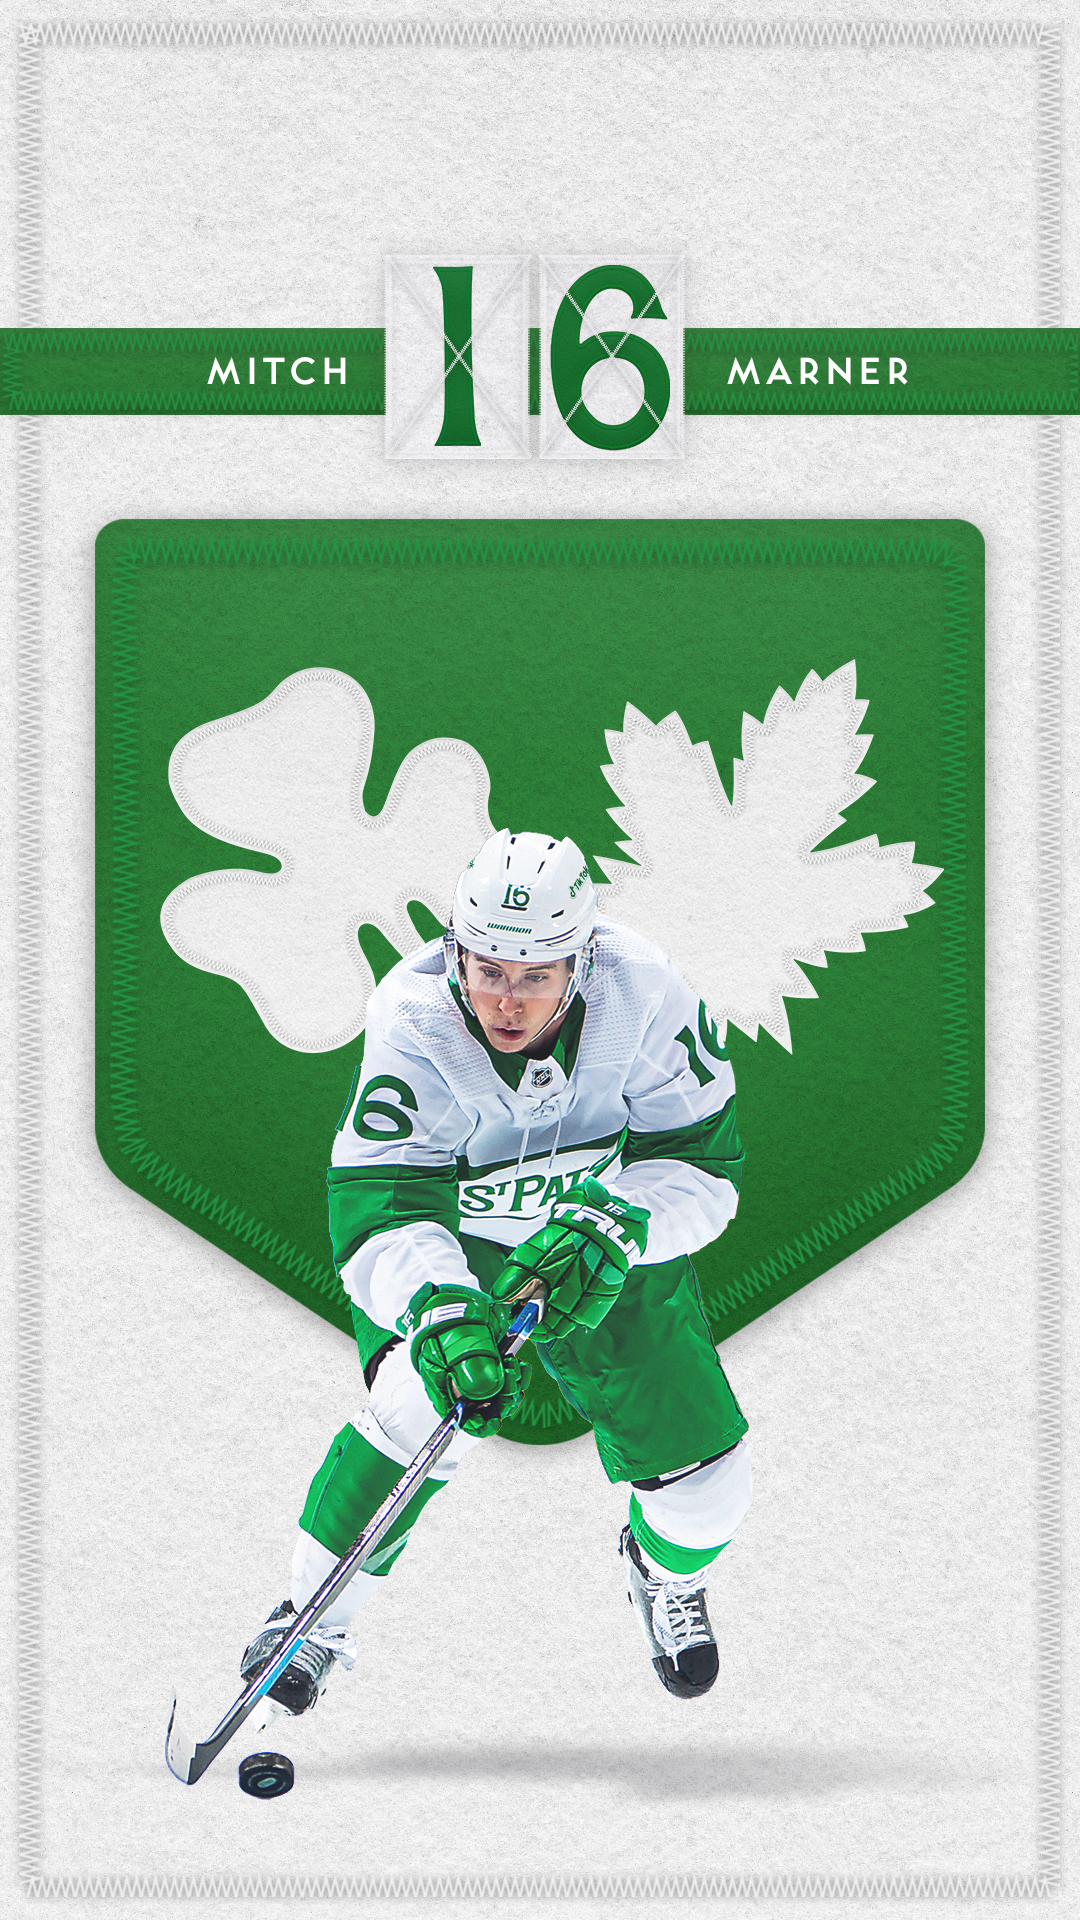 Toronto Maple Leafs on X: Bringing the St. Pats spirit for  #WallpaperWednesday ☘️ #LeafsgoBrách☘️ #LeafsForever   / X